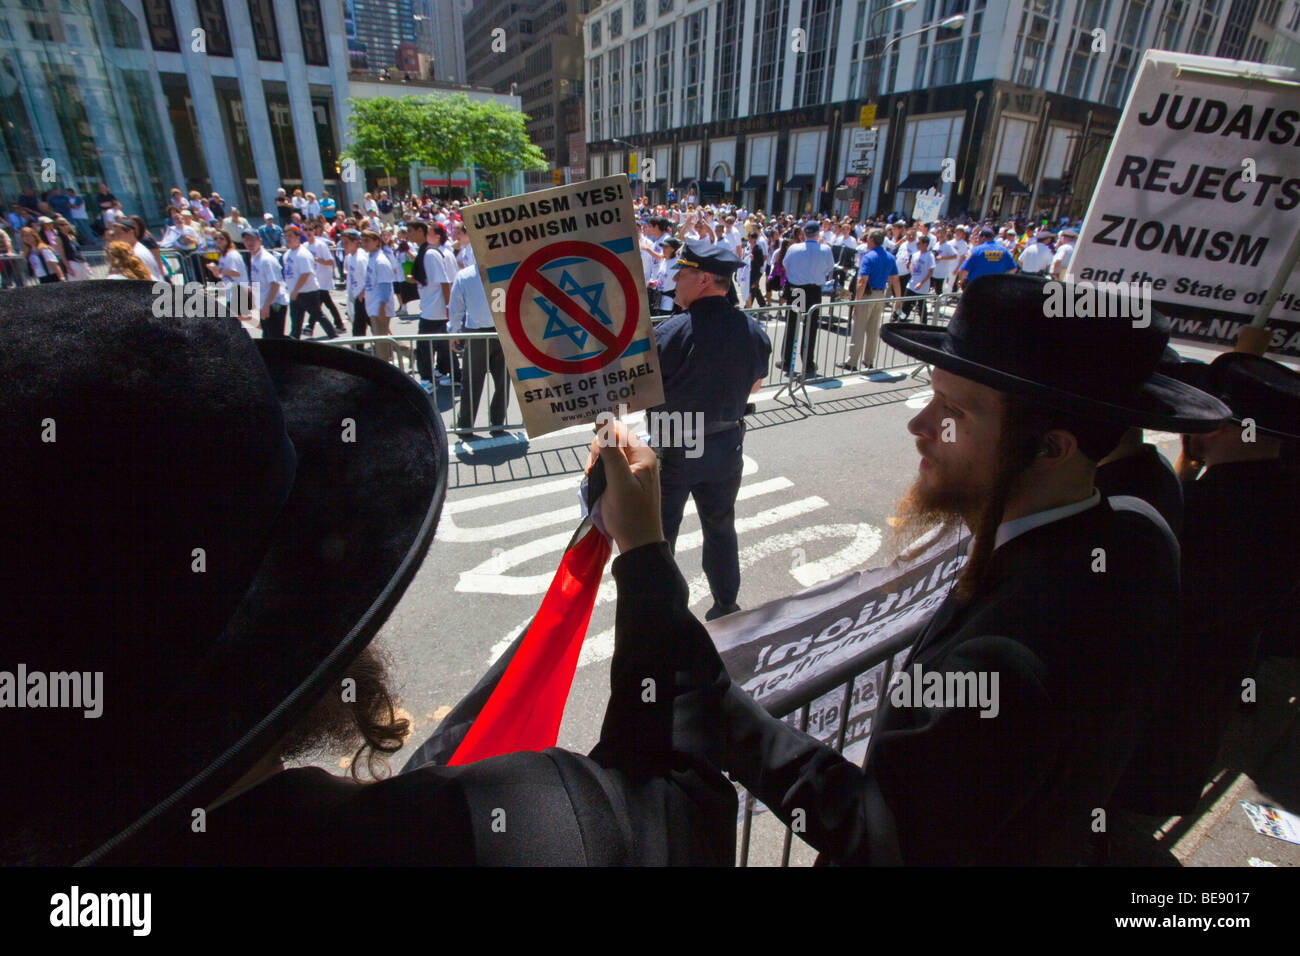 Hasidic Jewish Rabbis against Zionism at the Israel Parade in New York City Stock Photo